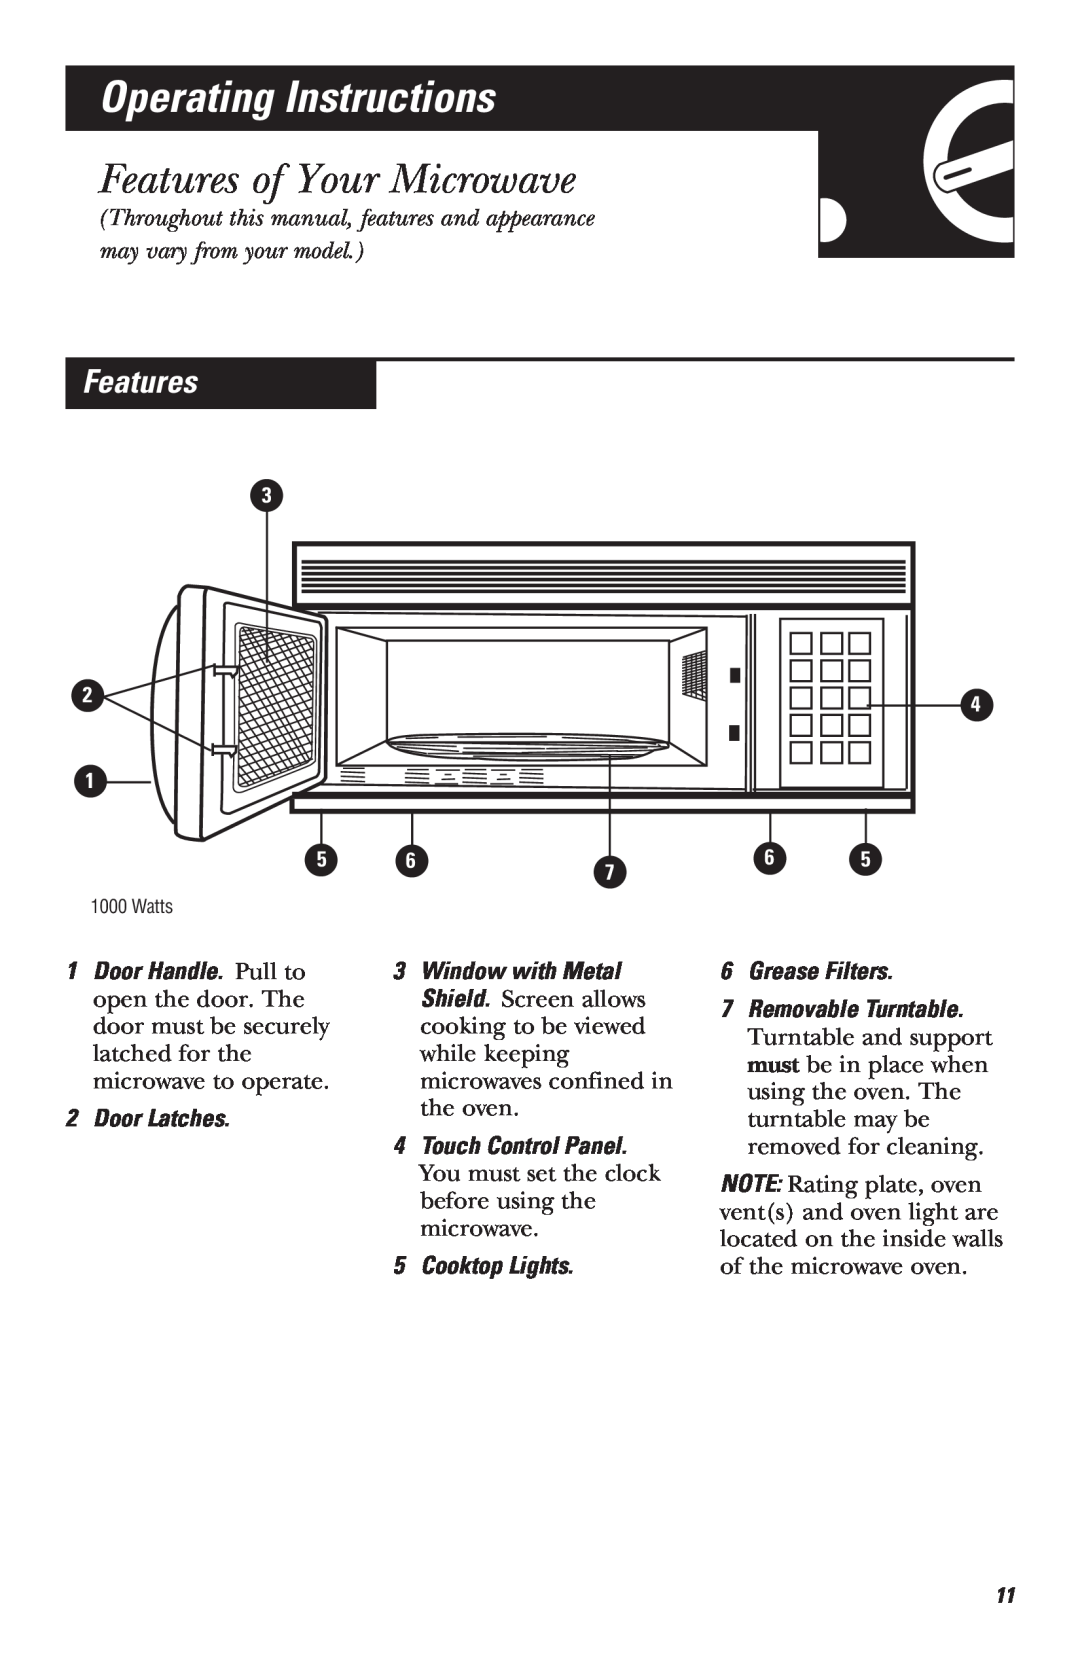 Mabe Canada JVM1620, JVM1635 Operating Instructions, Features of Your Microwave, 2Door Latches, 4Touch Control Panel 